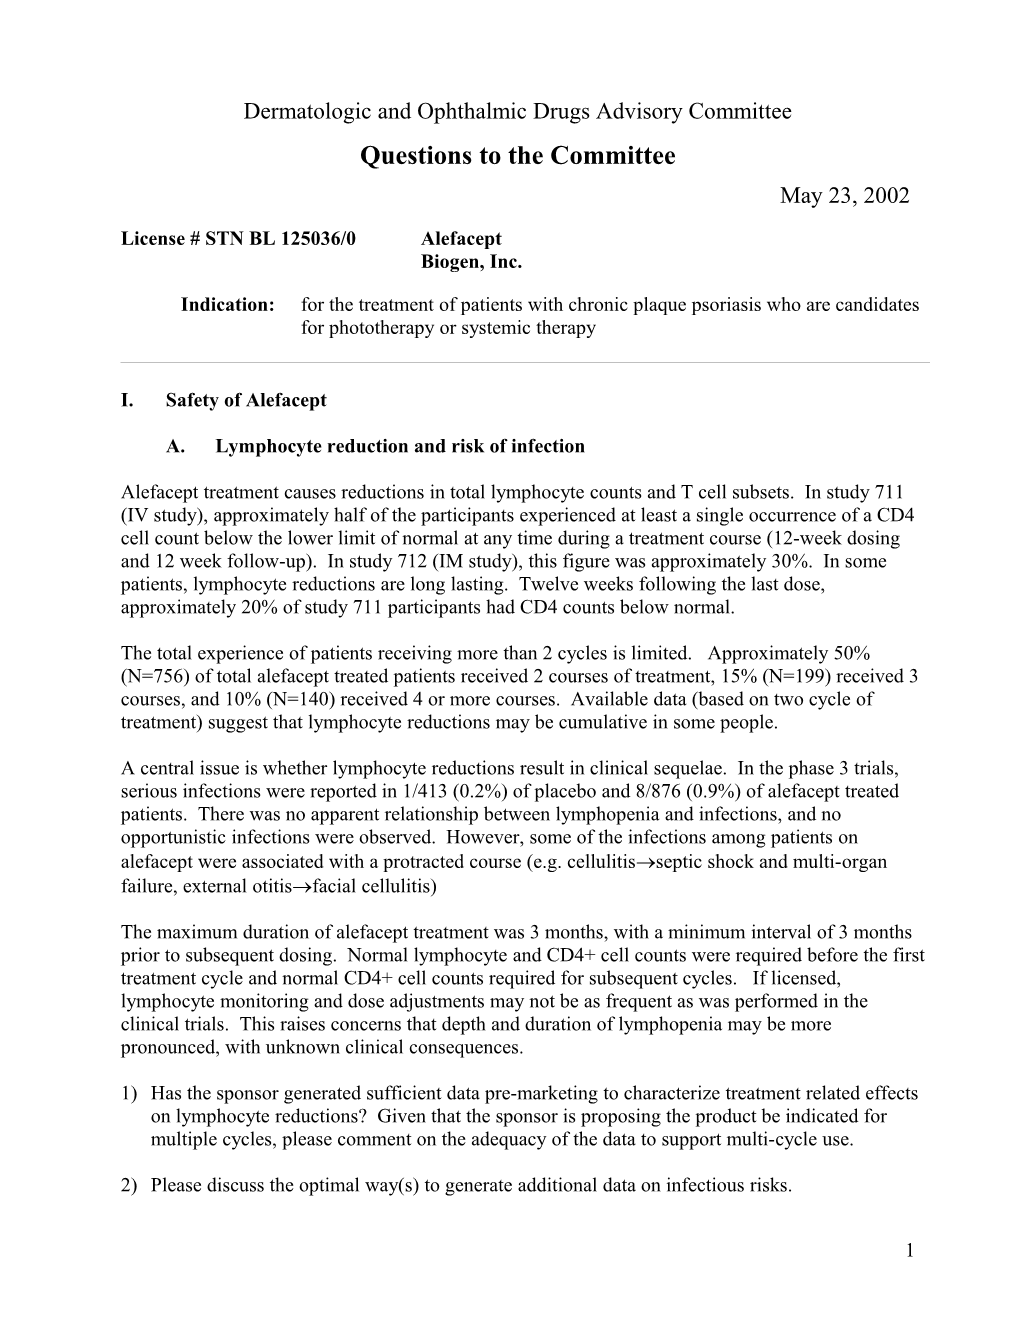 Draft Questions for the Dermatologics Advisory Committee